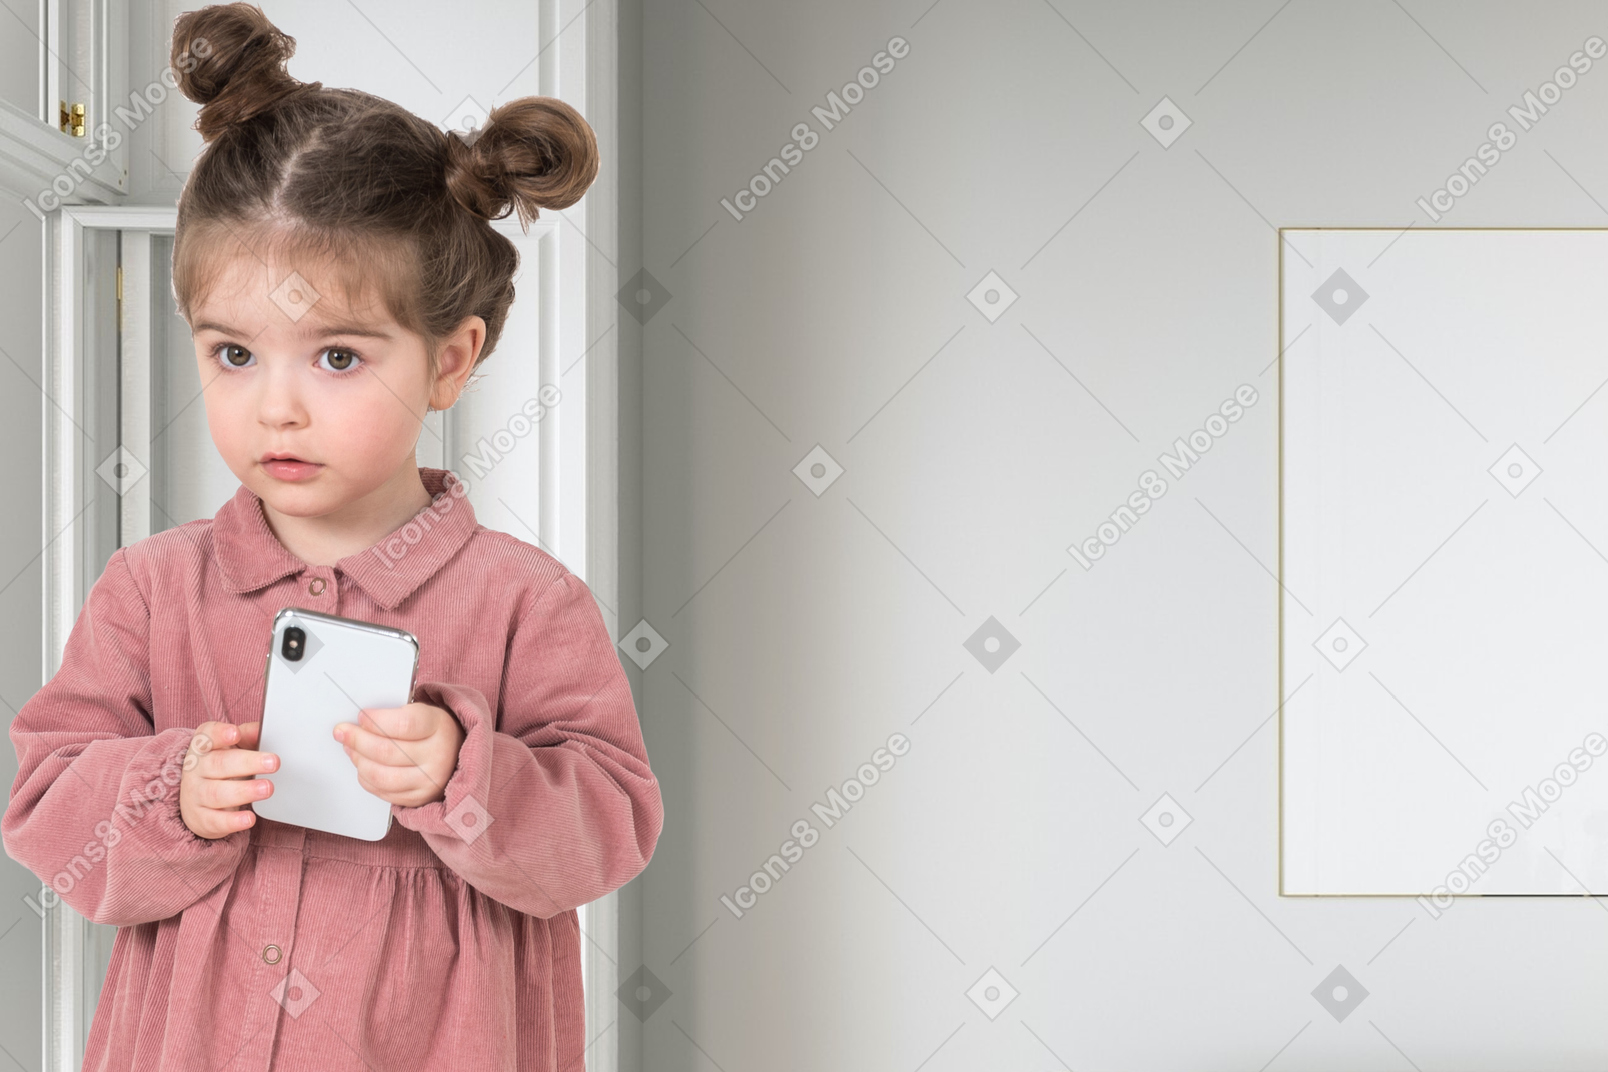 A little girl holding a phone in her hands